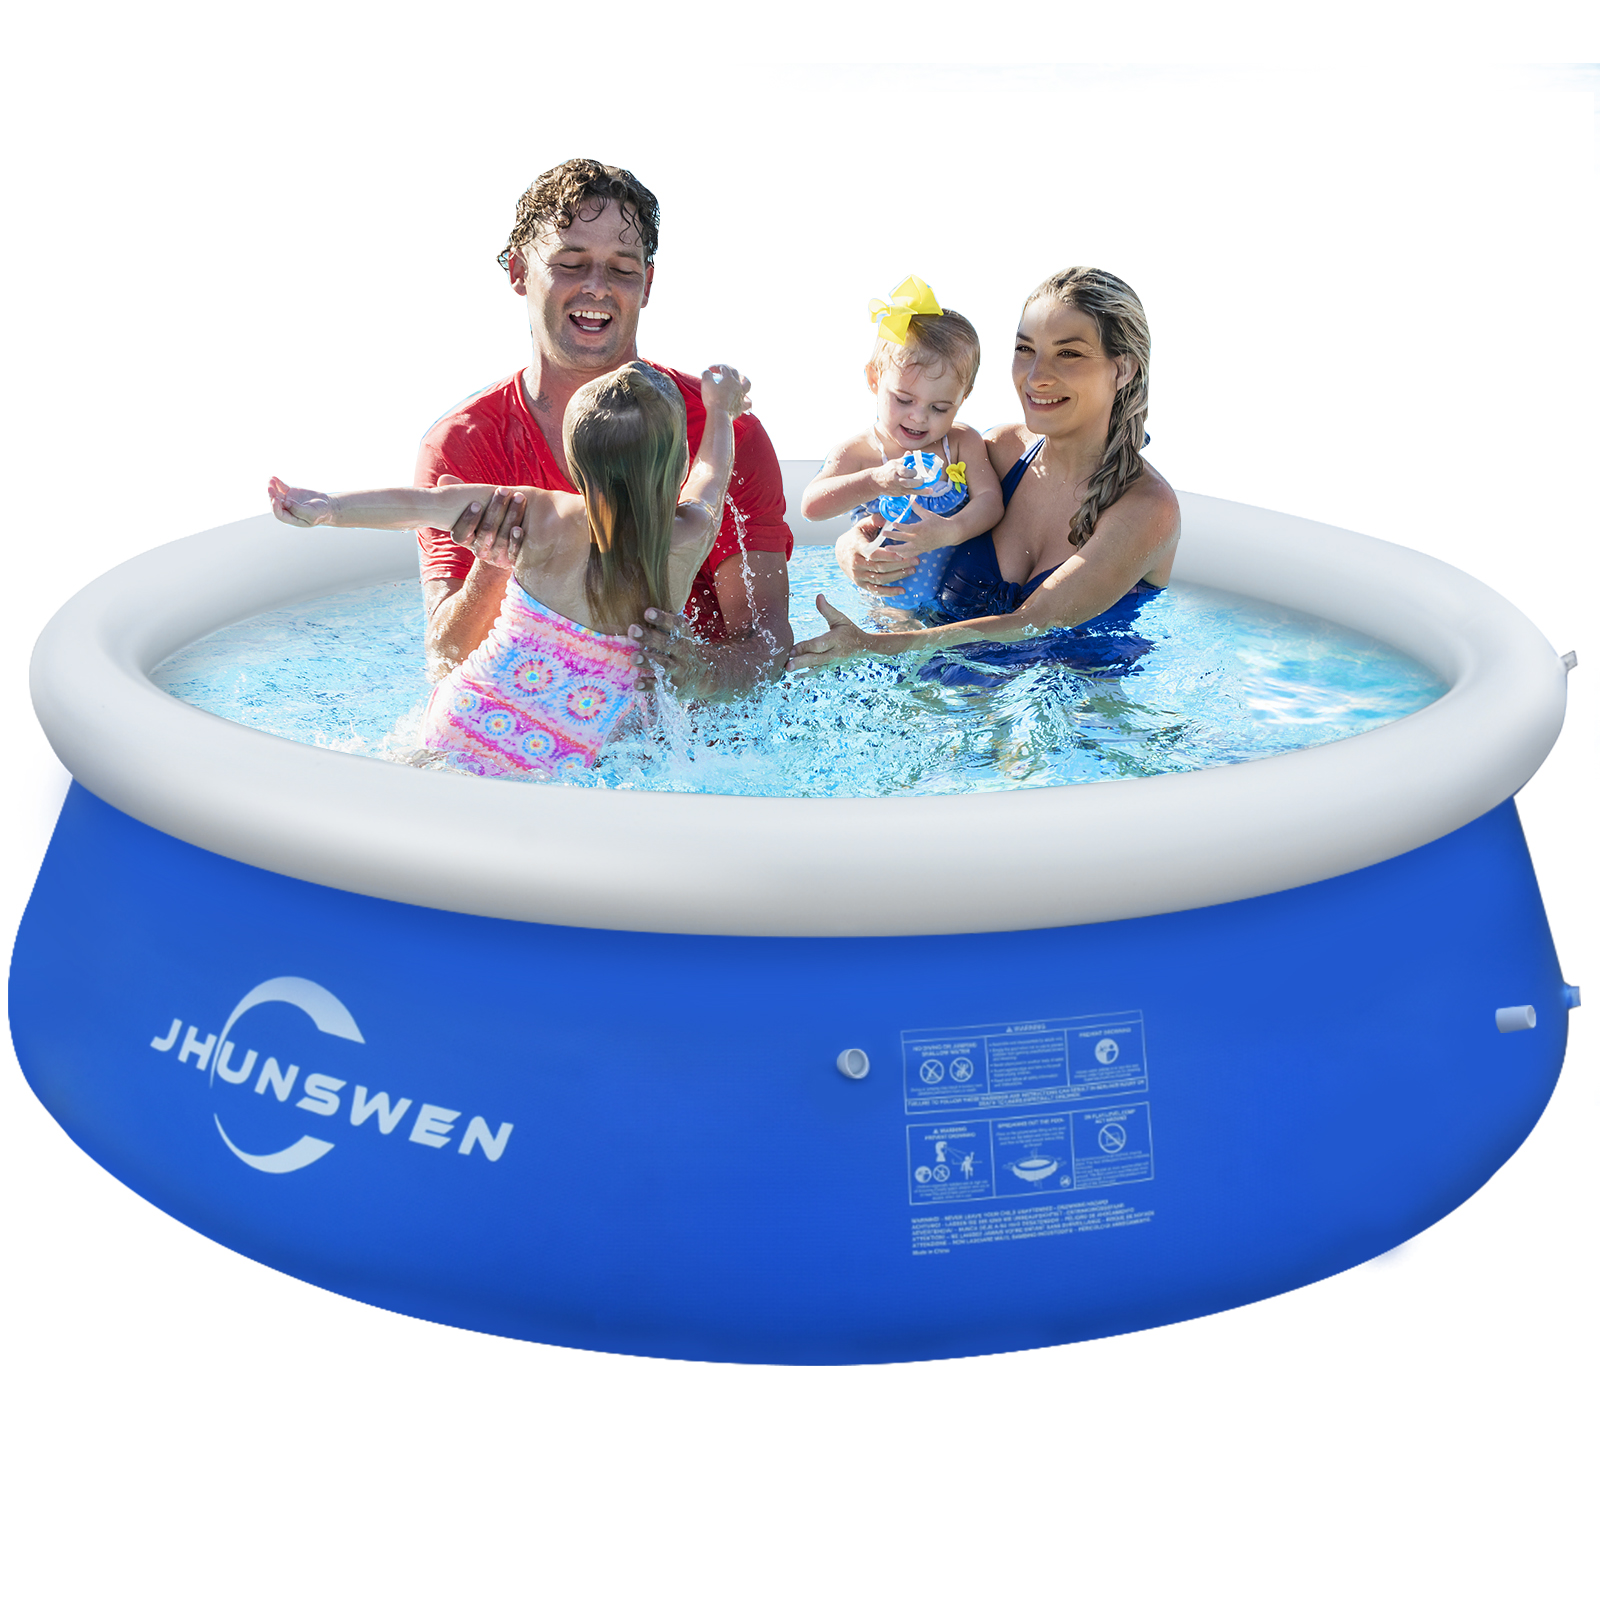 8ft x 25in Above Ground Pool - Buy Above Ground Pool, Wading Pool 